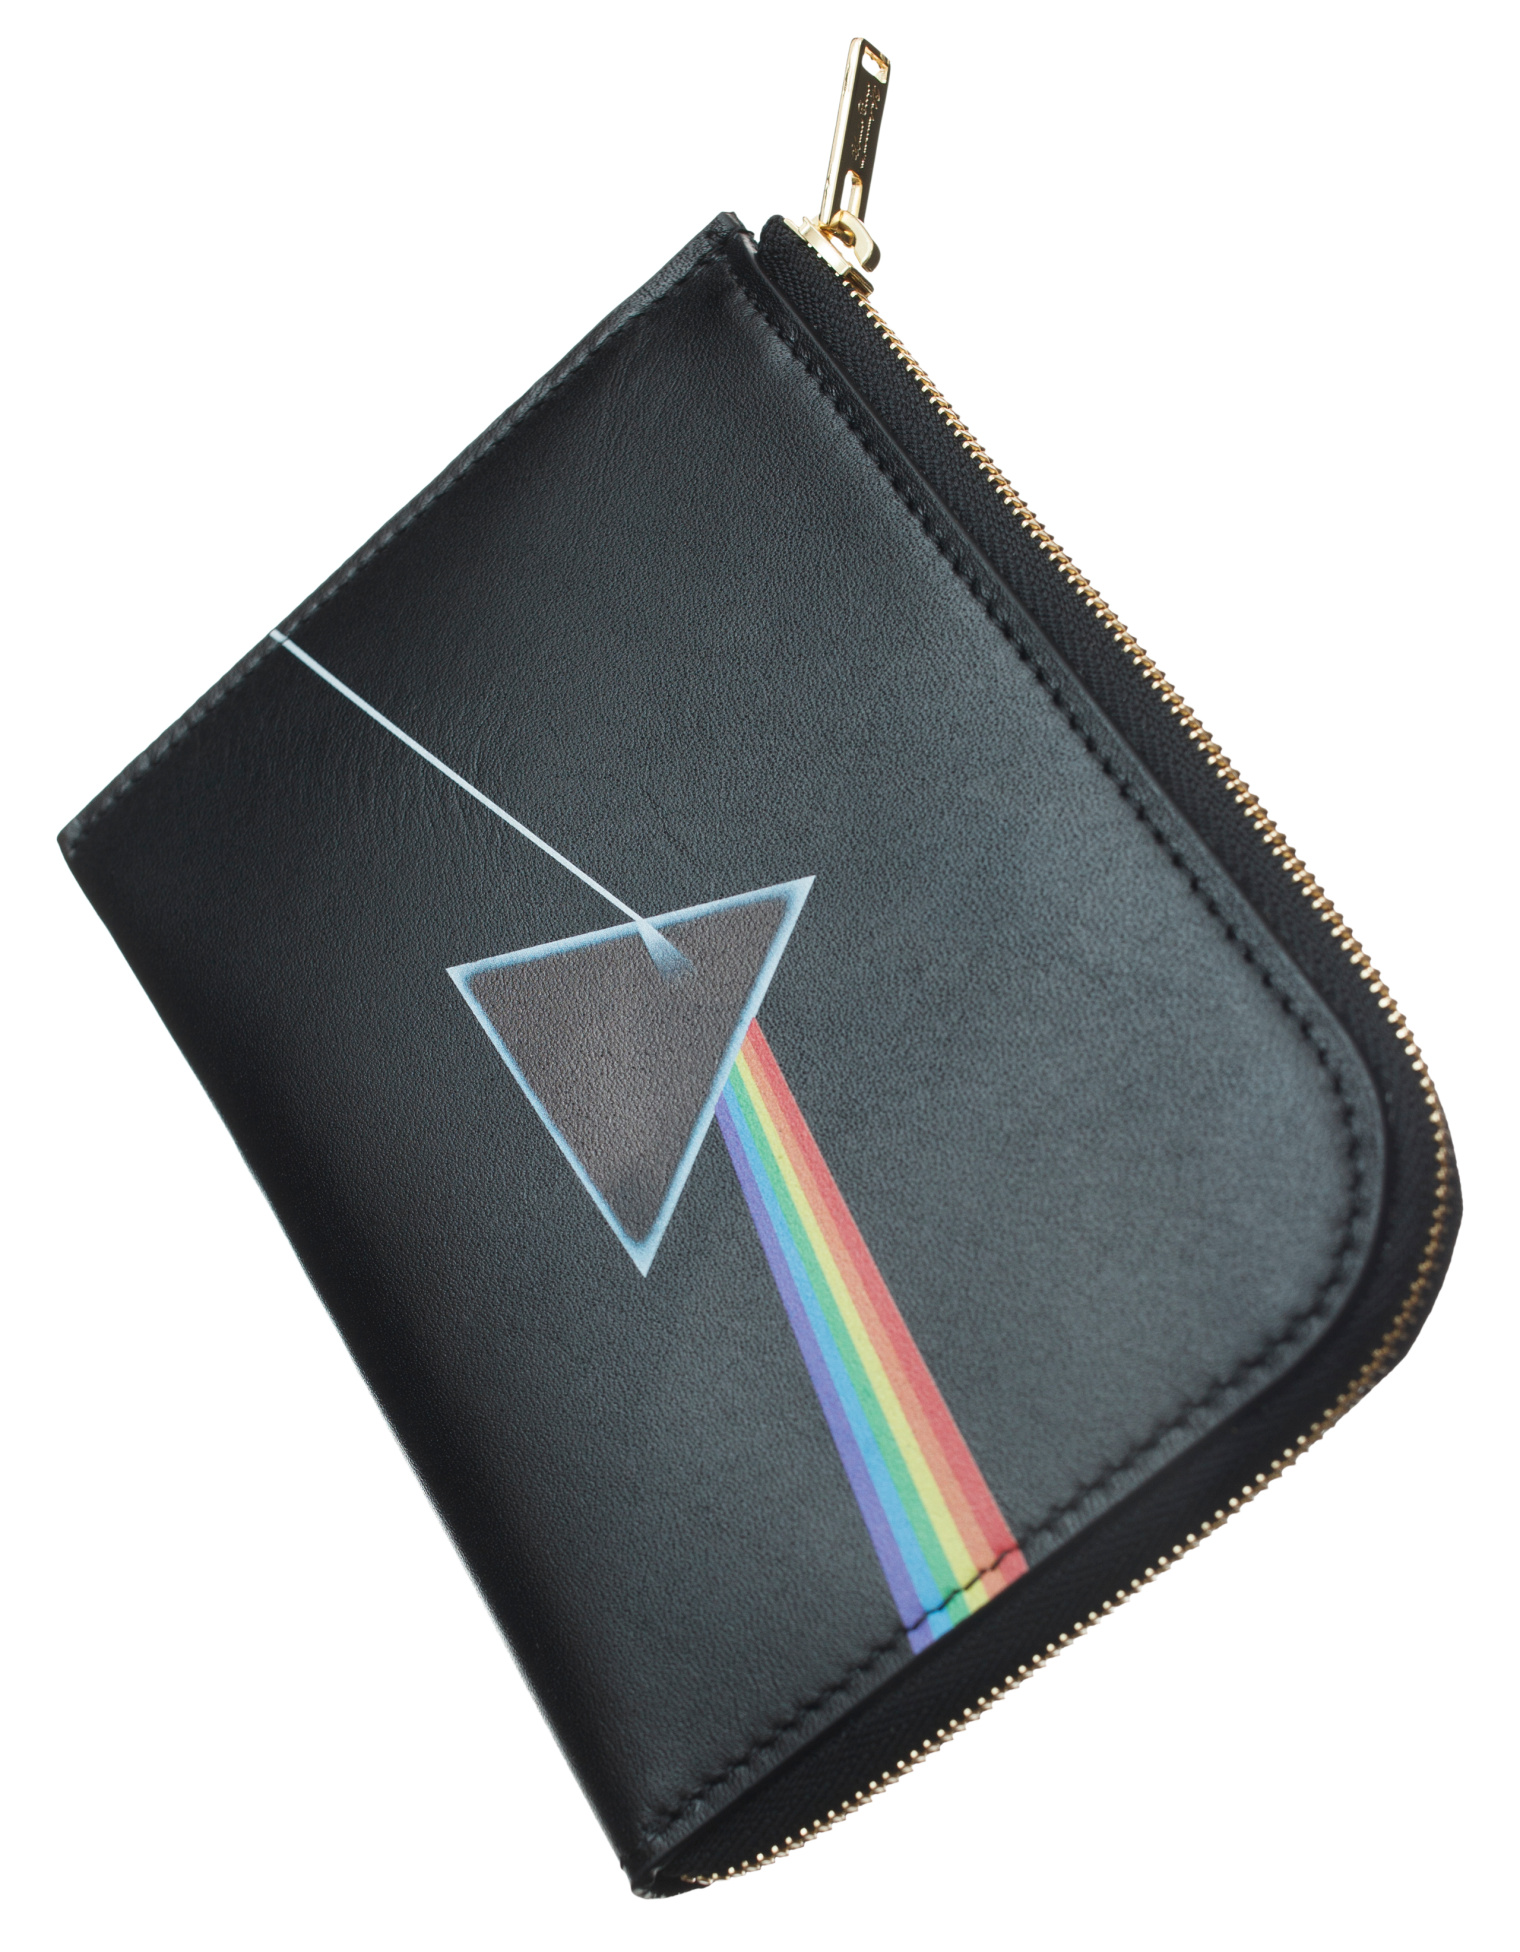 Undercover Leather Pink Floyd Wallet